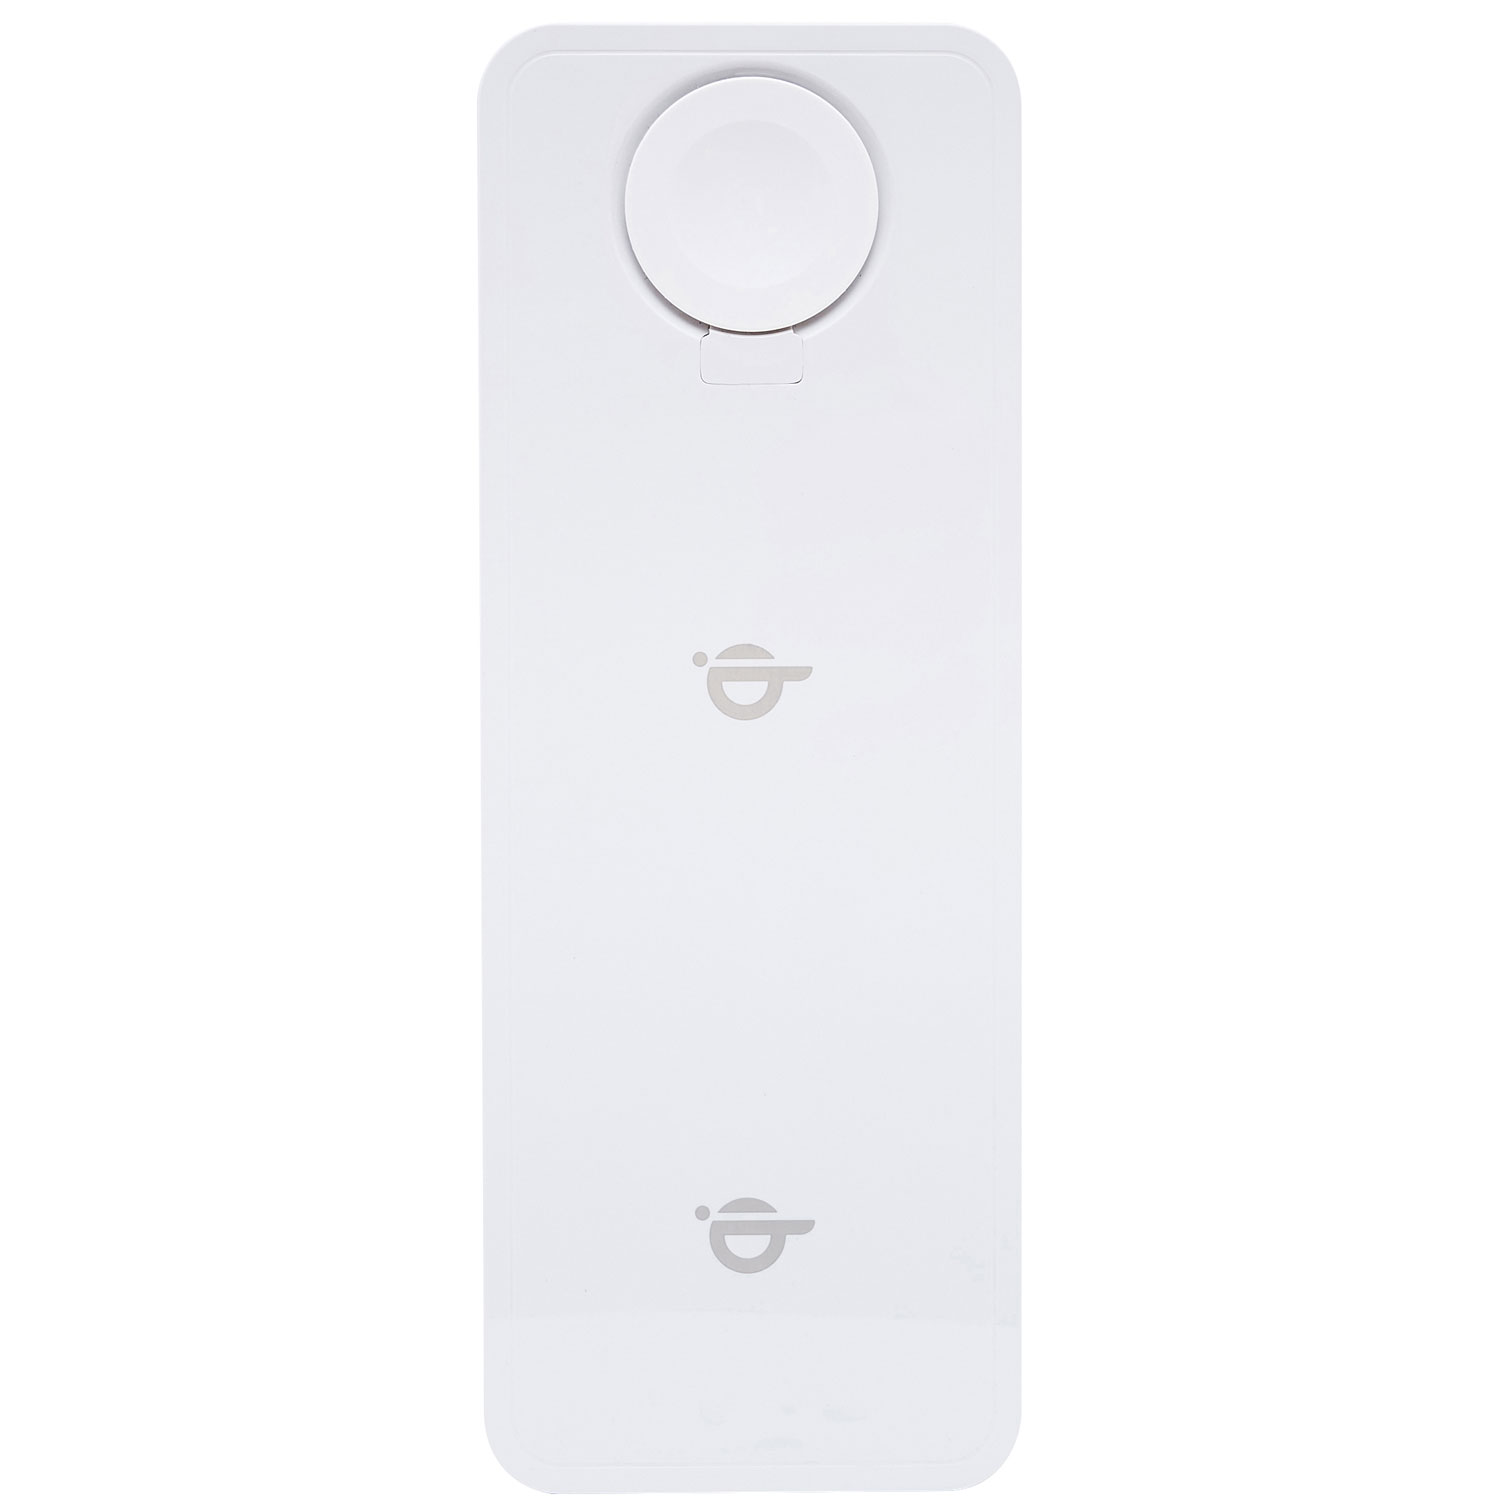 Einova 3-in-1 Portable Wireless Charger for iPhone - White